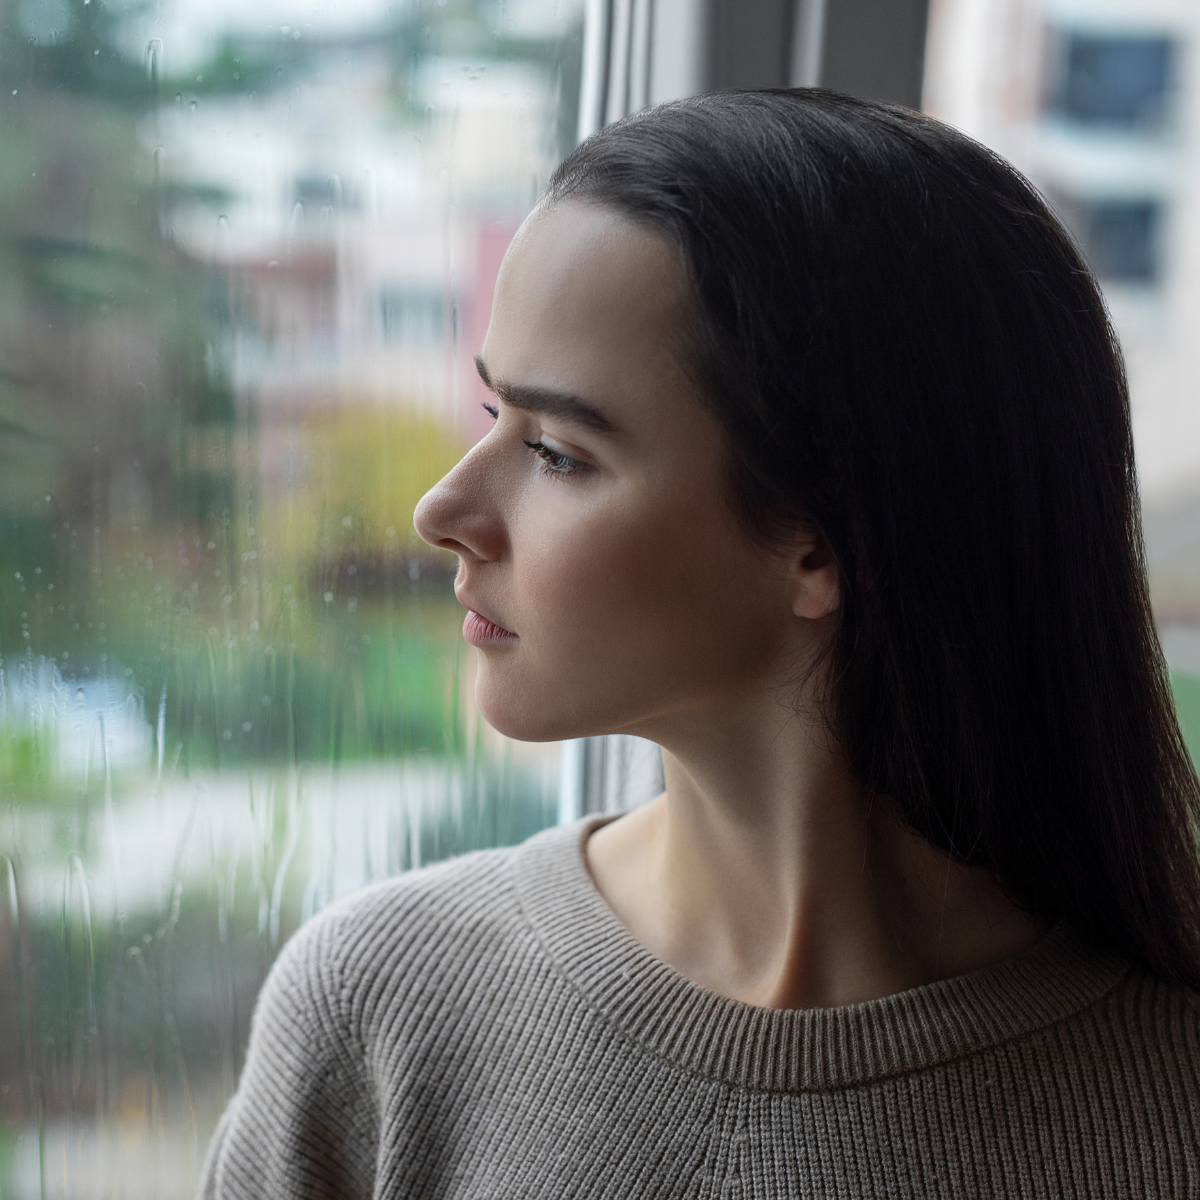 Girl looking out a window - negative self-talk